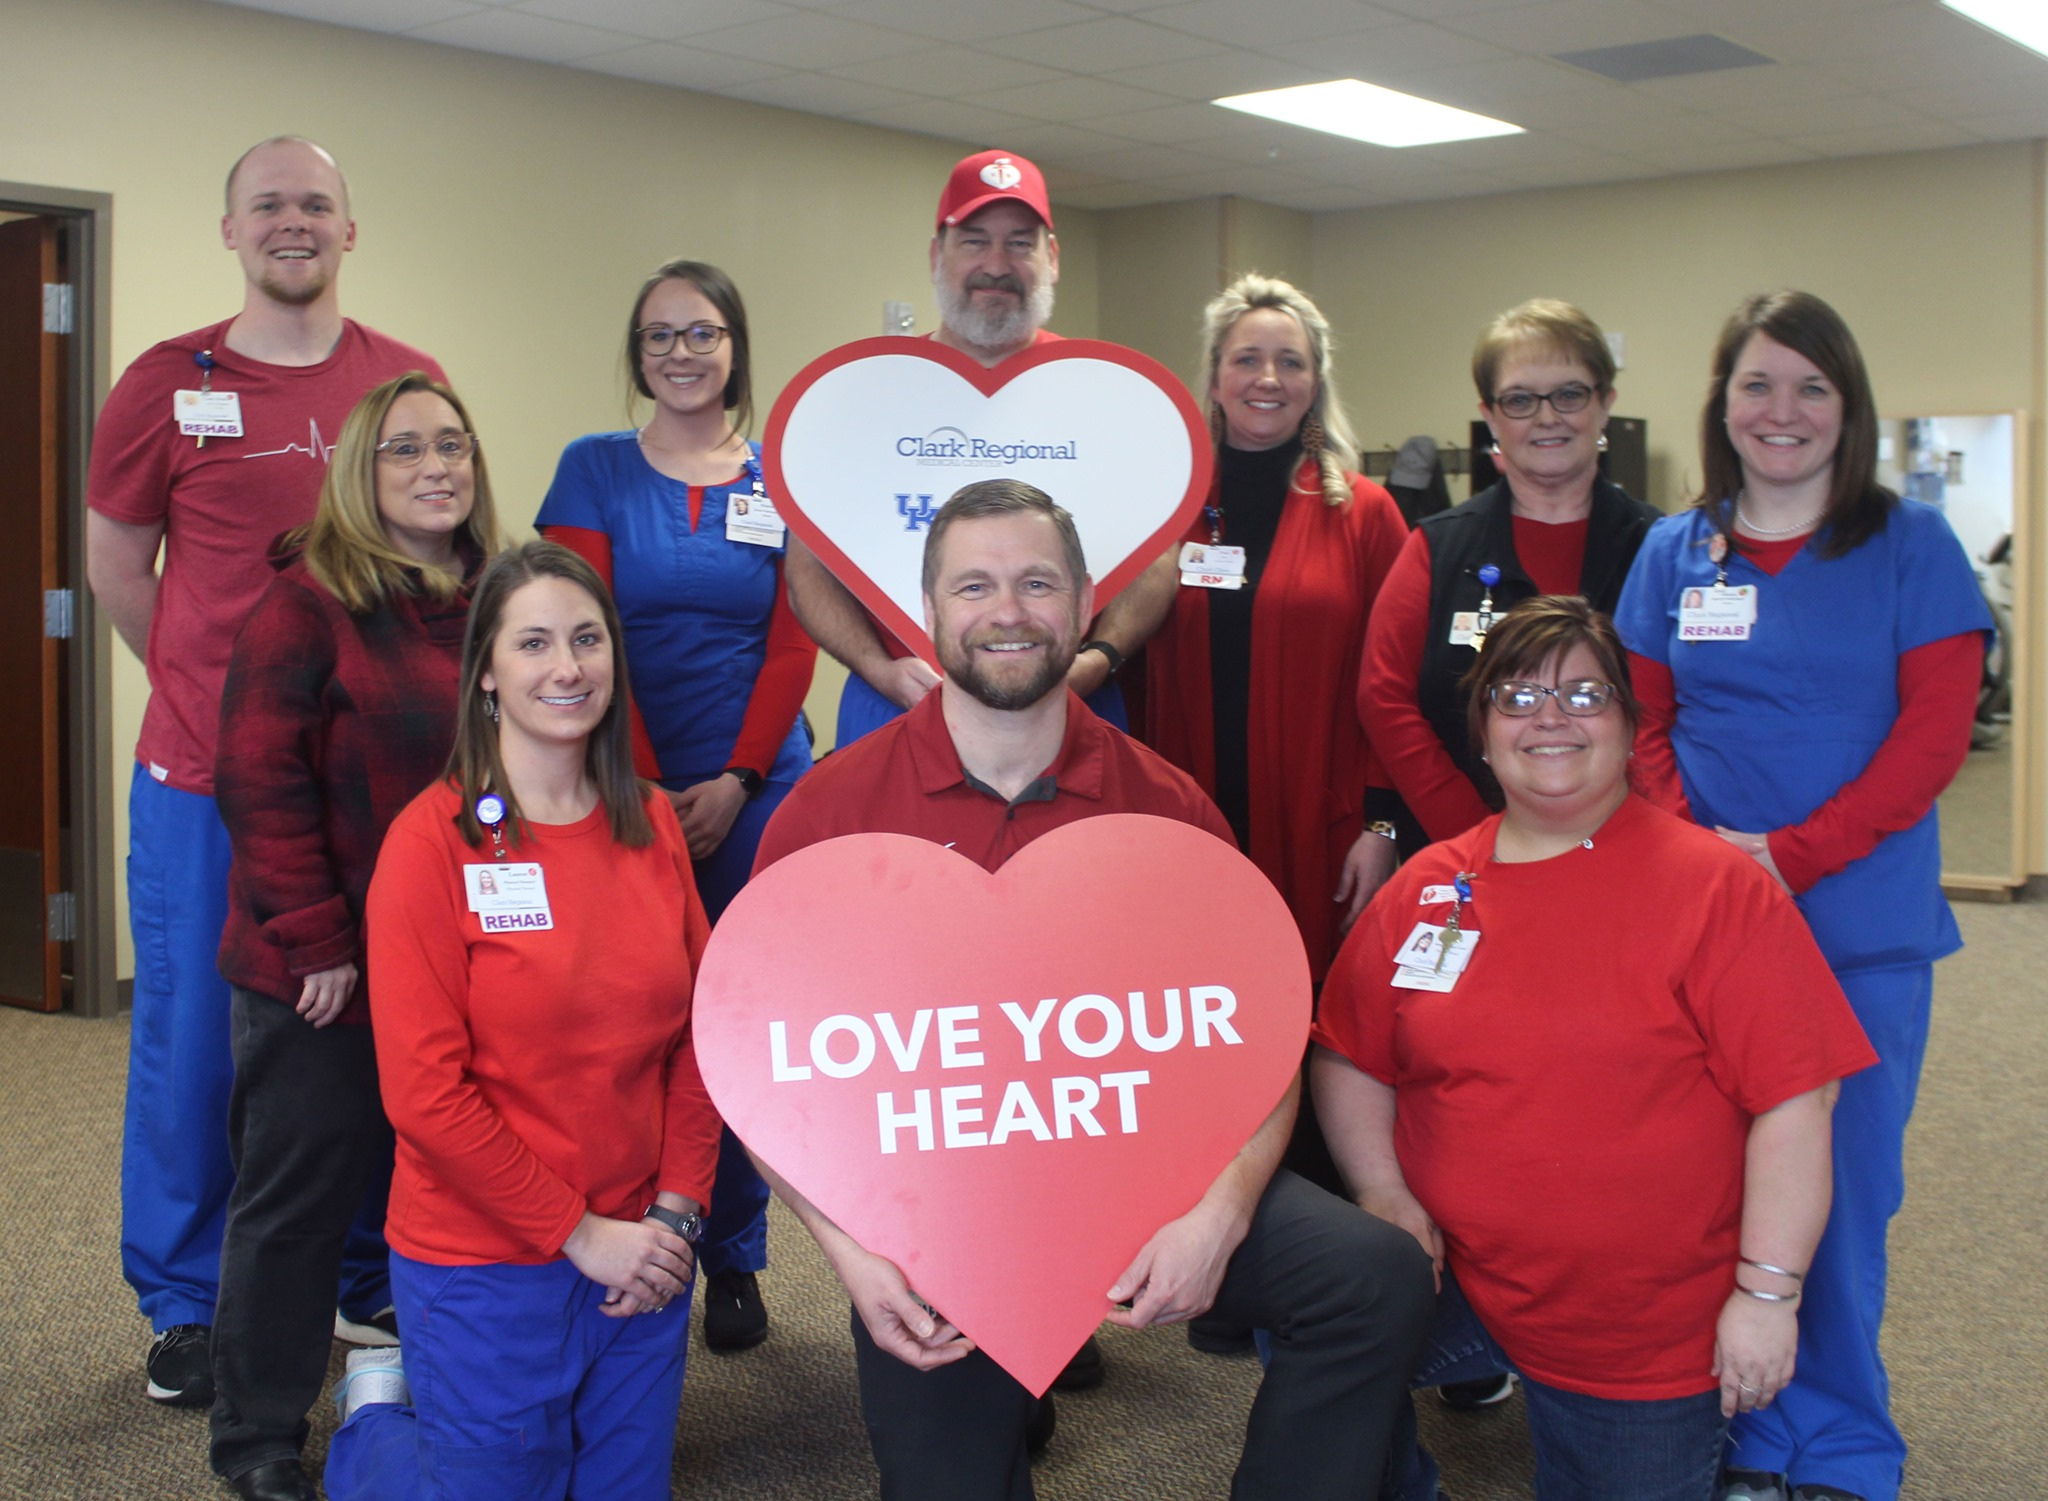 Members of the cardiovascular team at Clark Regional Medical Center gather for a photo.